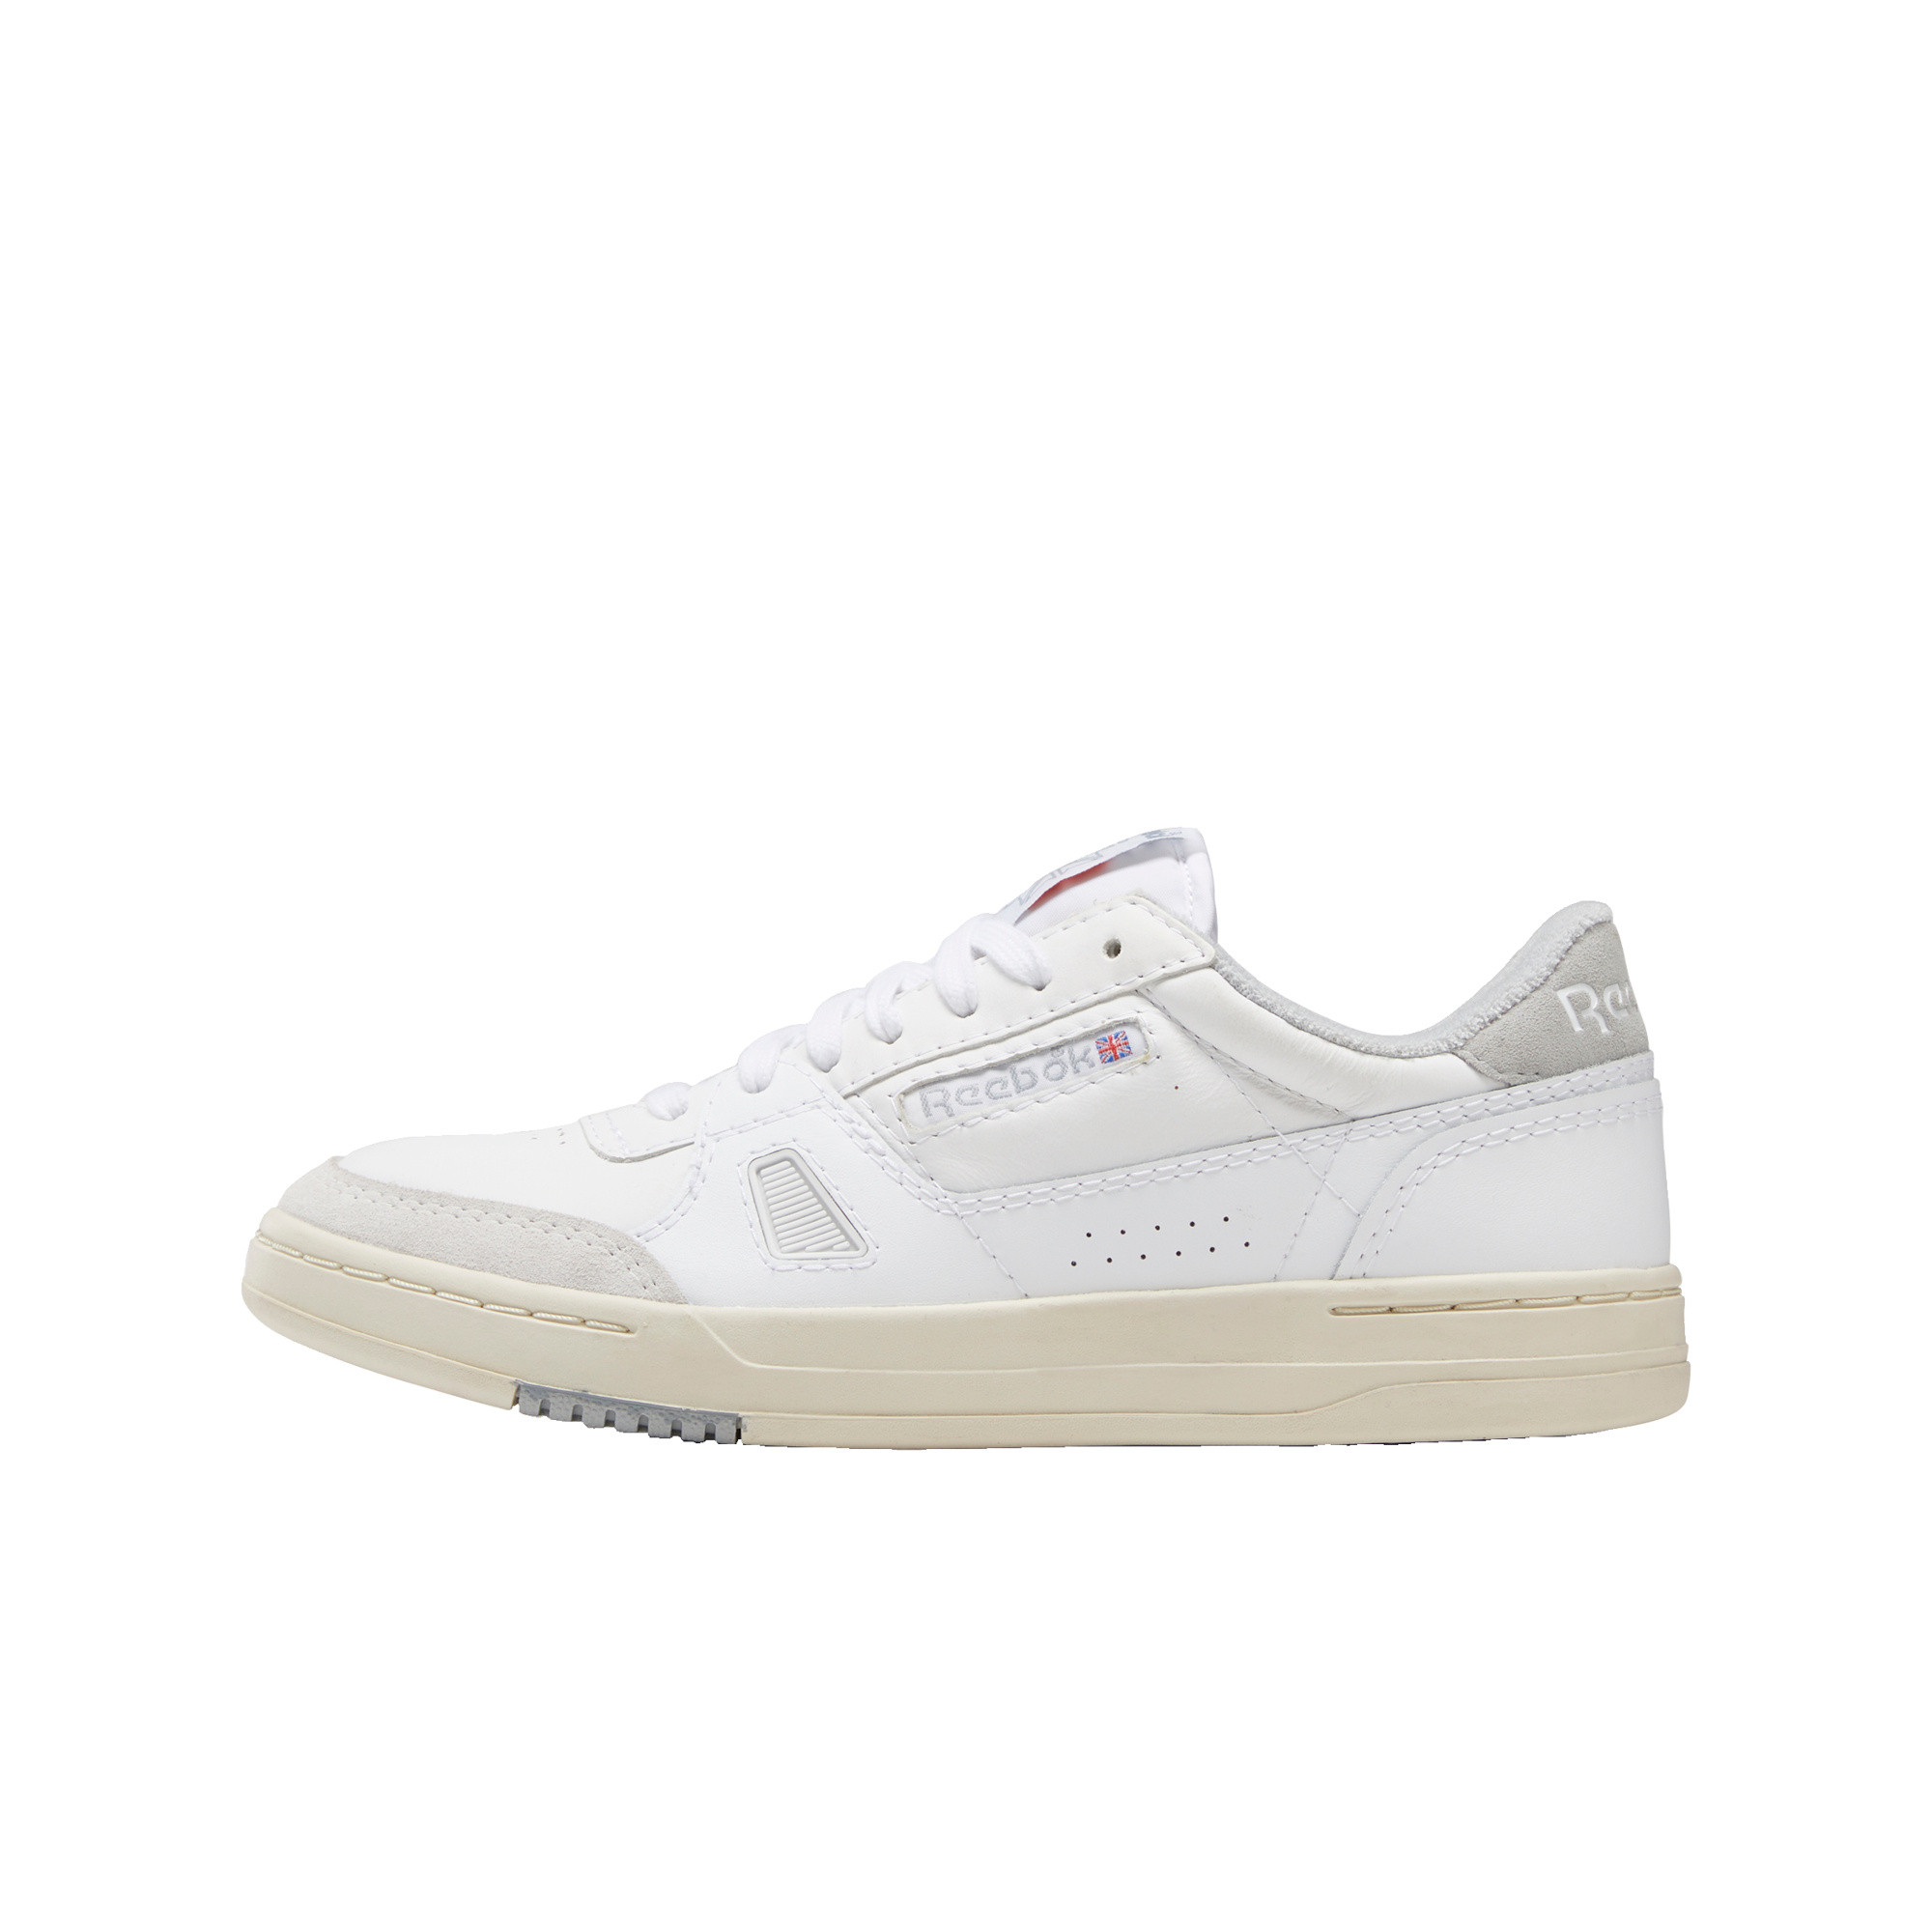 LT Court Shoes, White, large image number 1